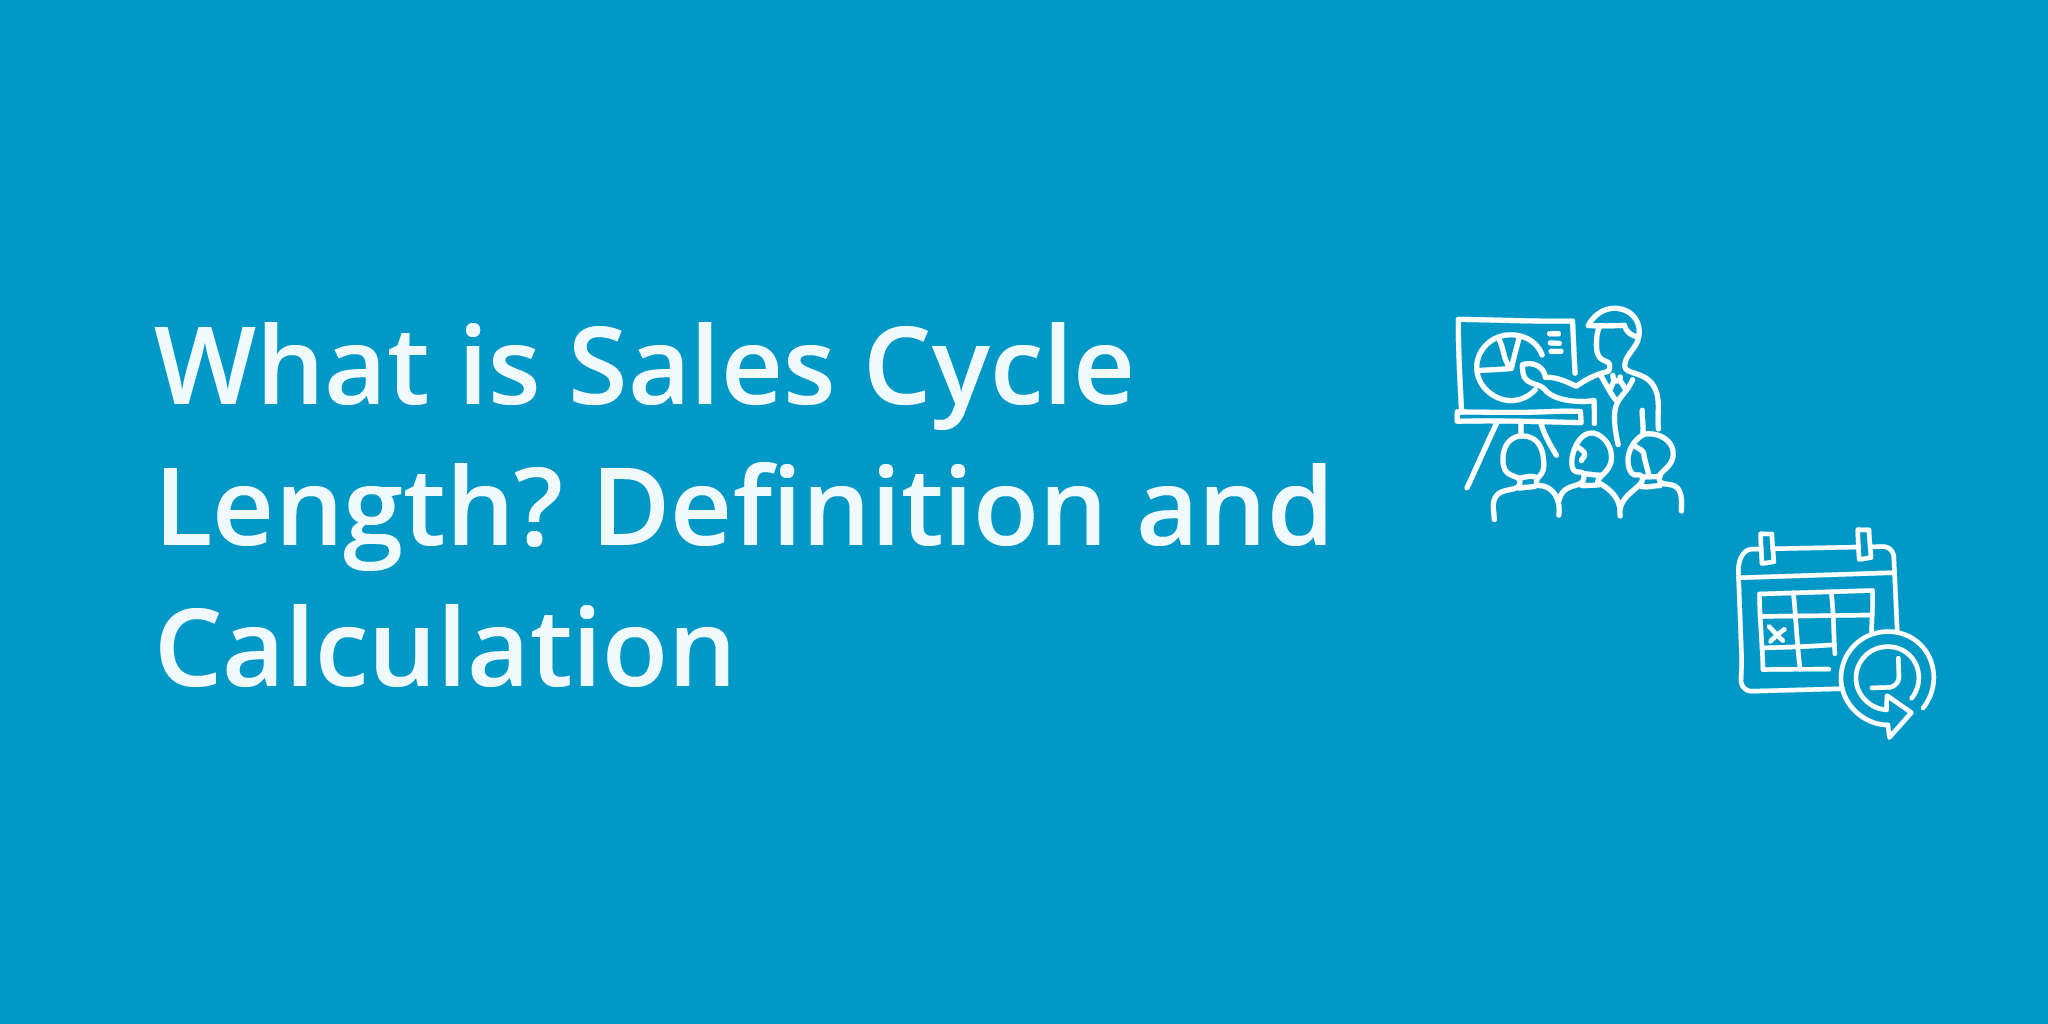 What Is Sales Cycle Length? Definition And Calculation | Telephones for business